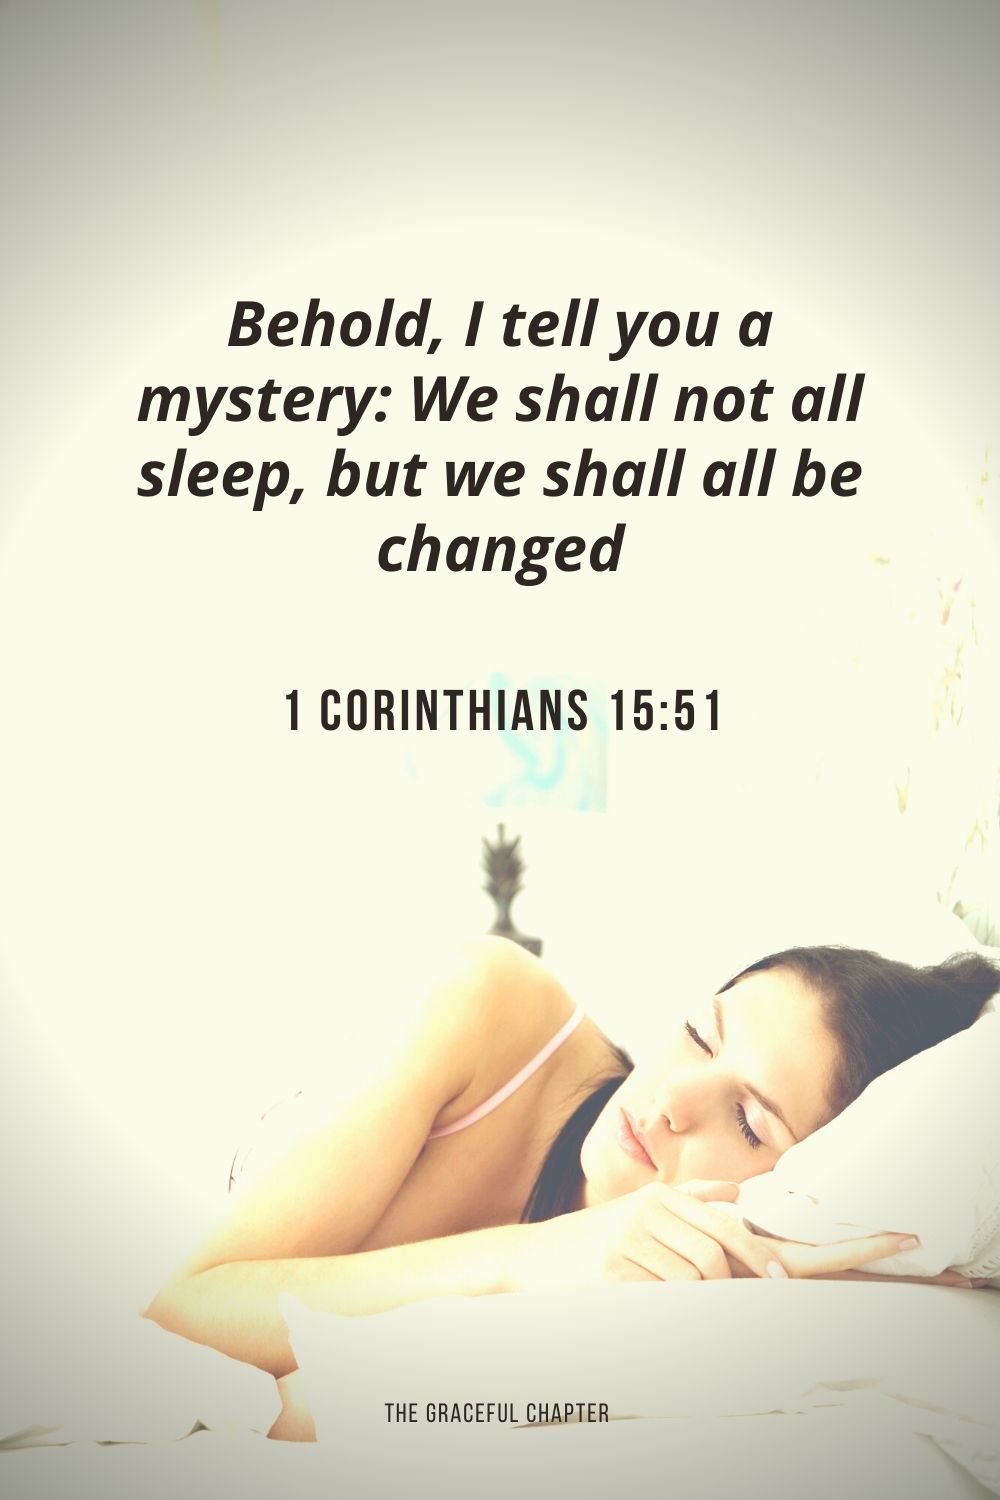 Behold, I tell you a mystery: We shall not all sleep, but we shall all be changed 1 Corinthians 15:51